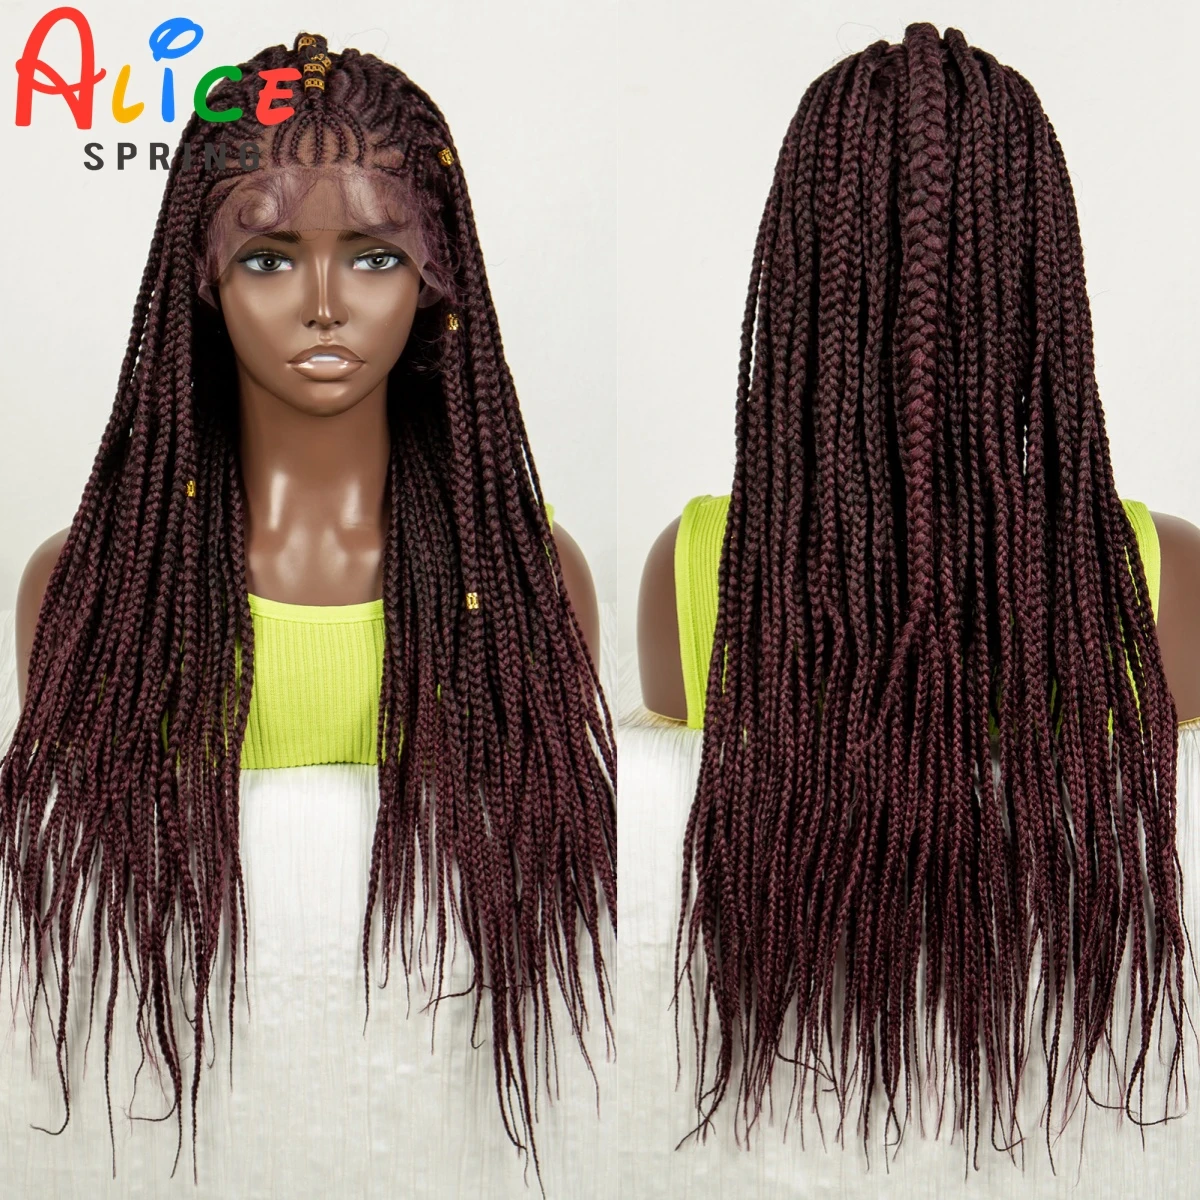 

Burgundy Straight Braided Wigs Synthetic Lace Front Braids Wig with Baby Hair Cornrow Knotless Box Braiding Wig for Black Women